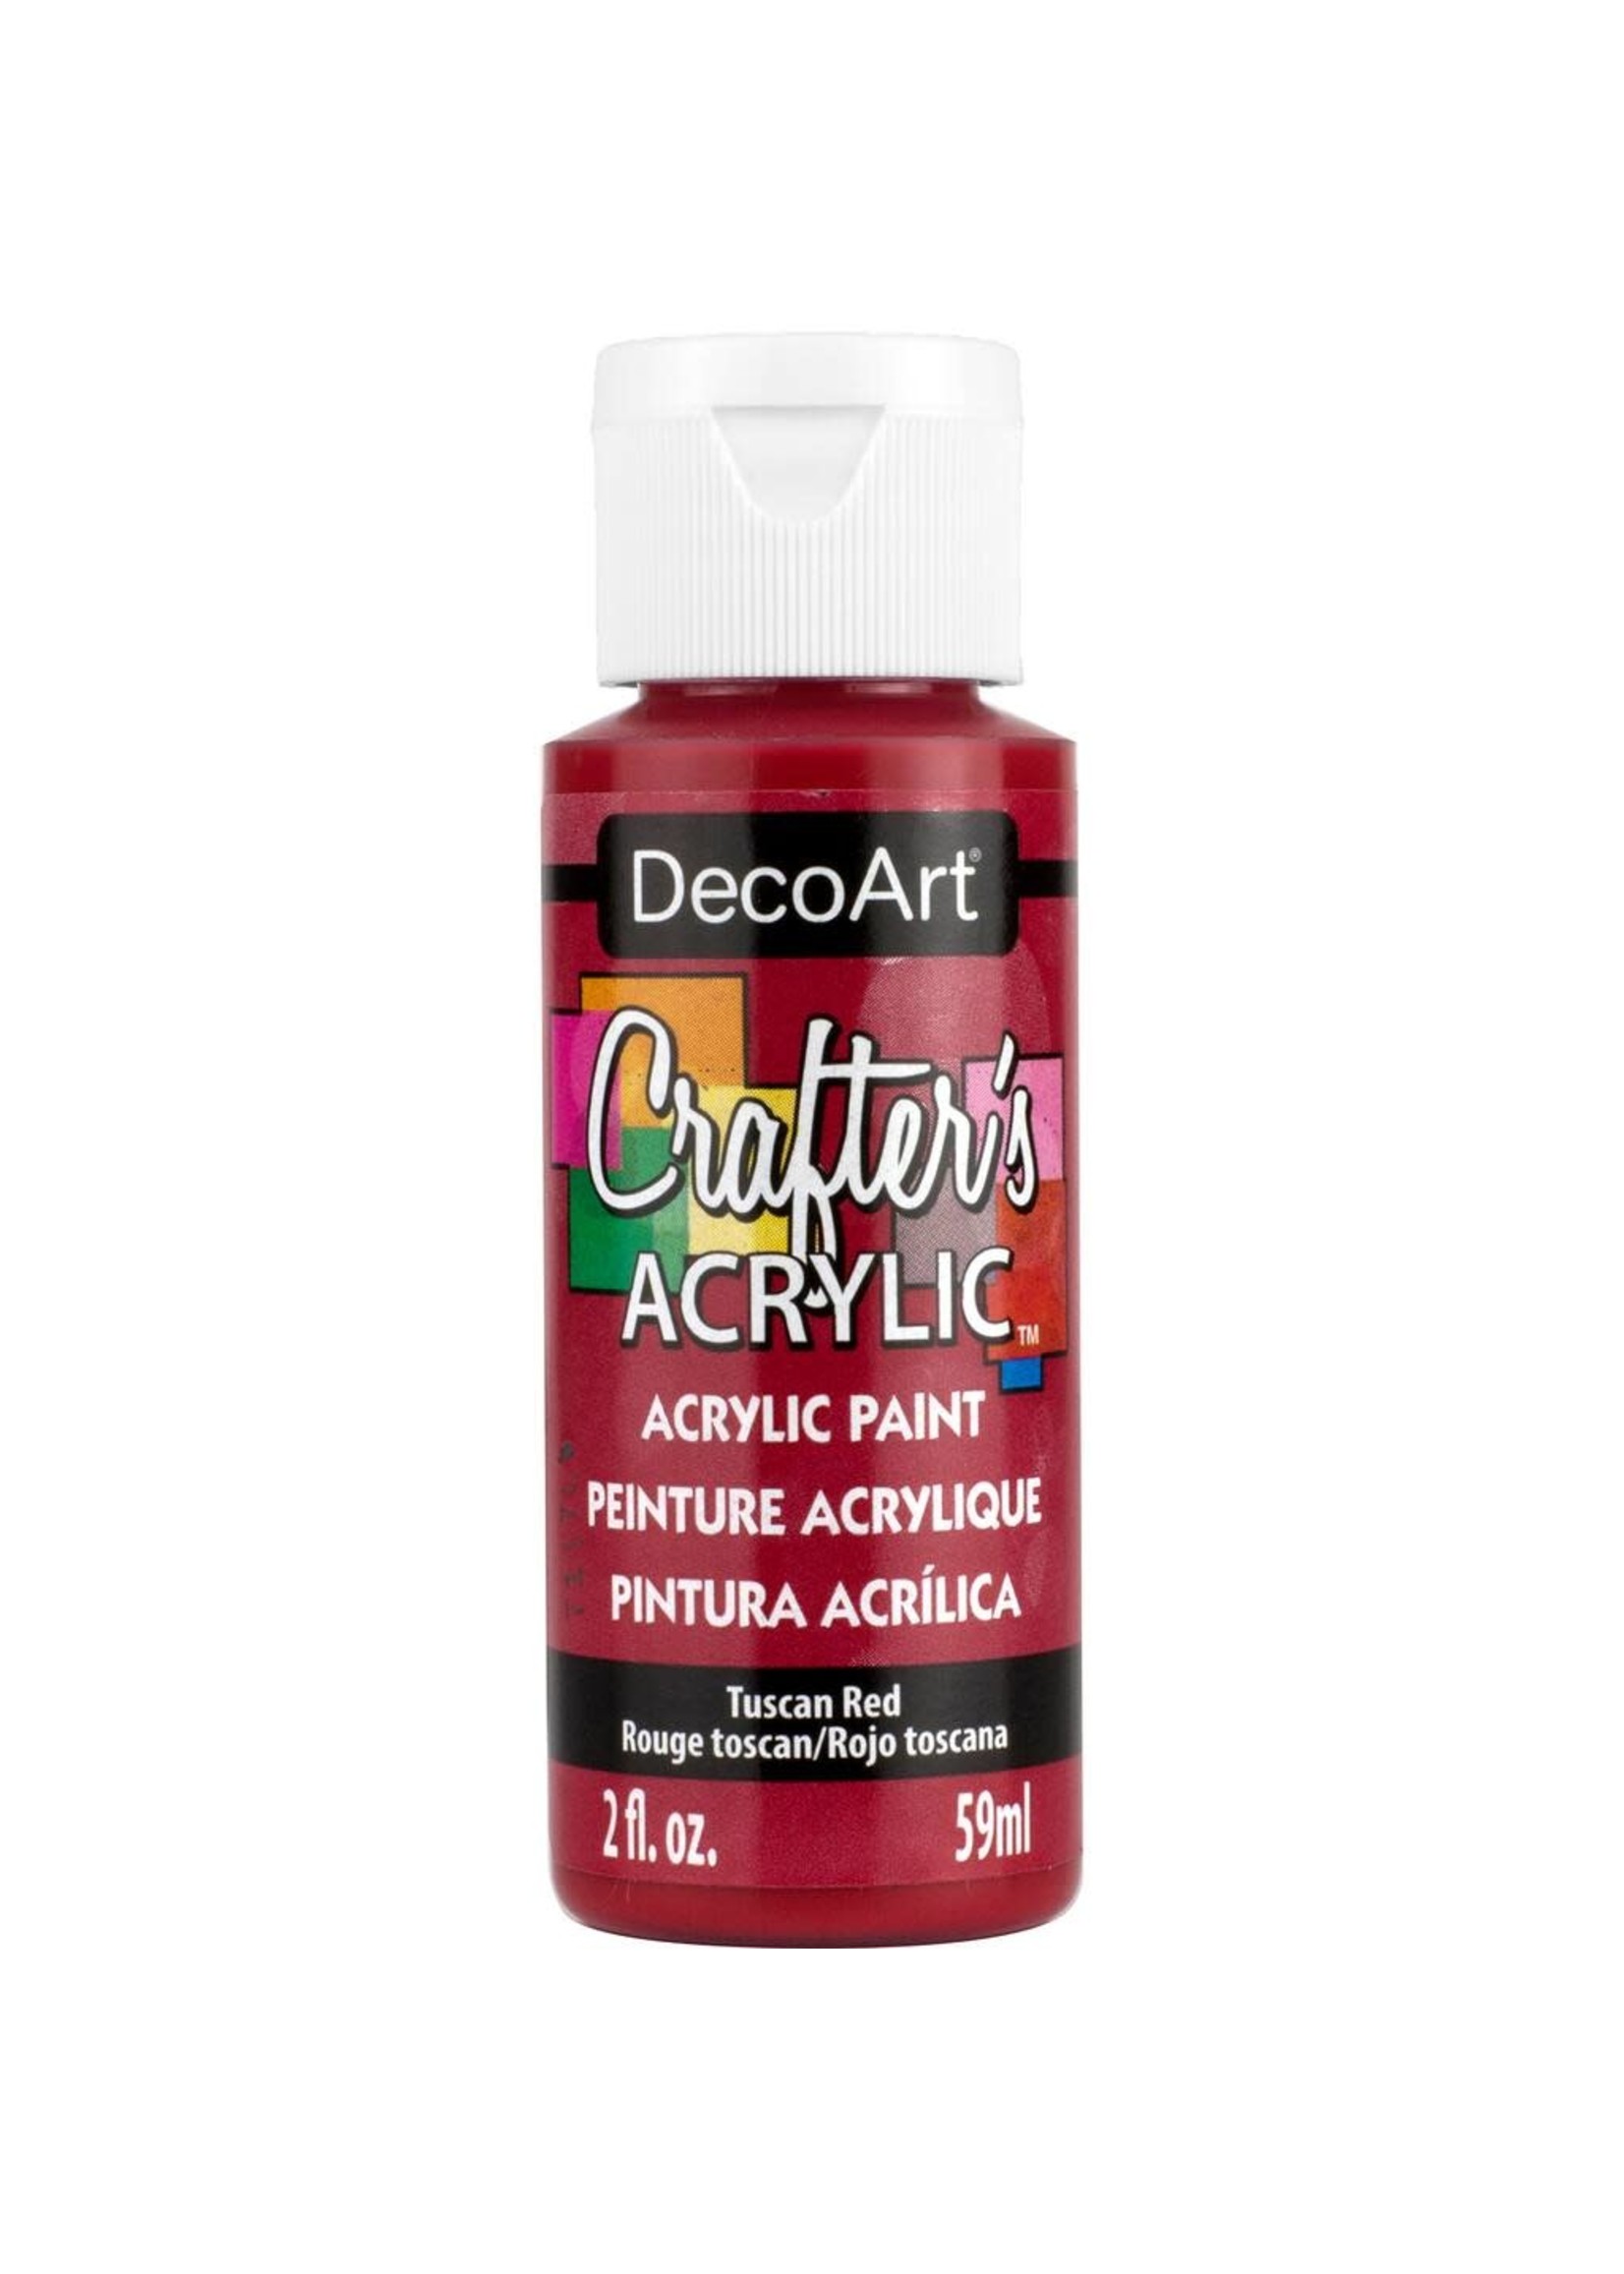 Crafters Acrylic Paint 2oz A126 Tuscan Red